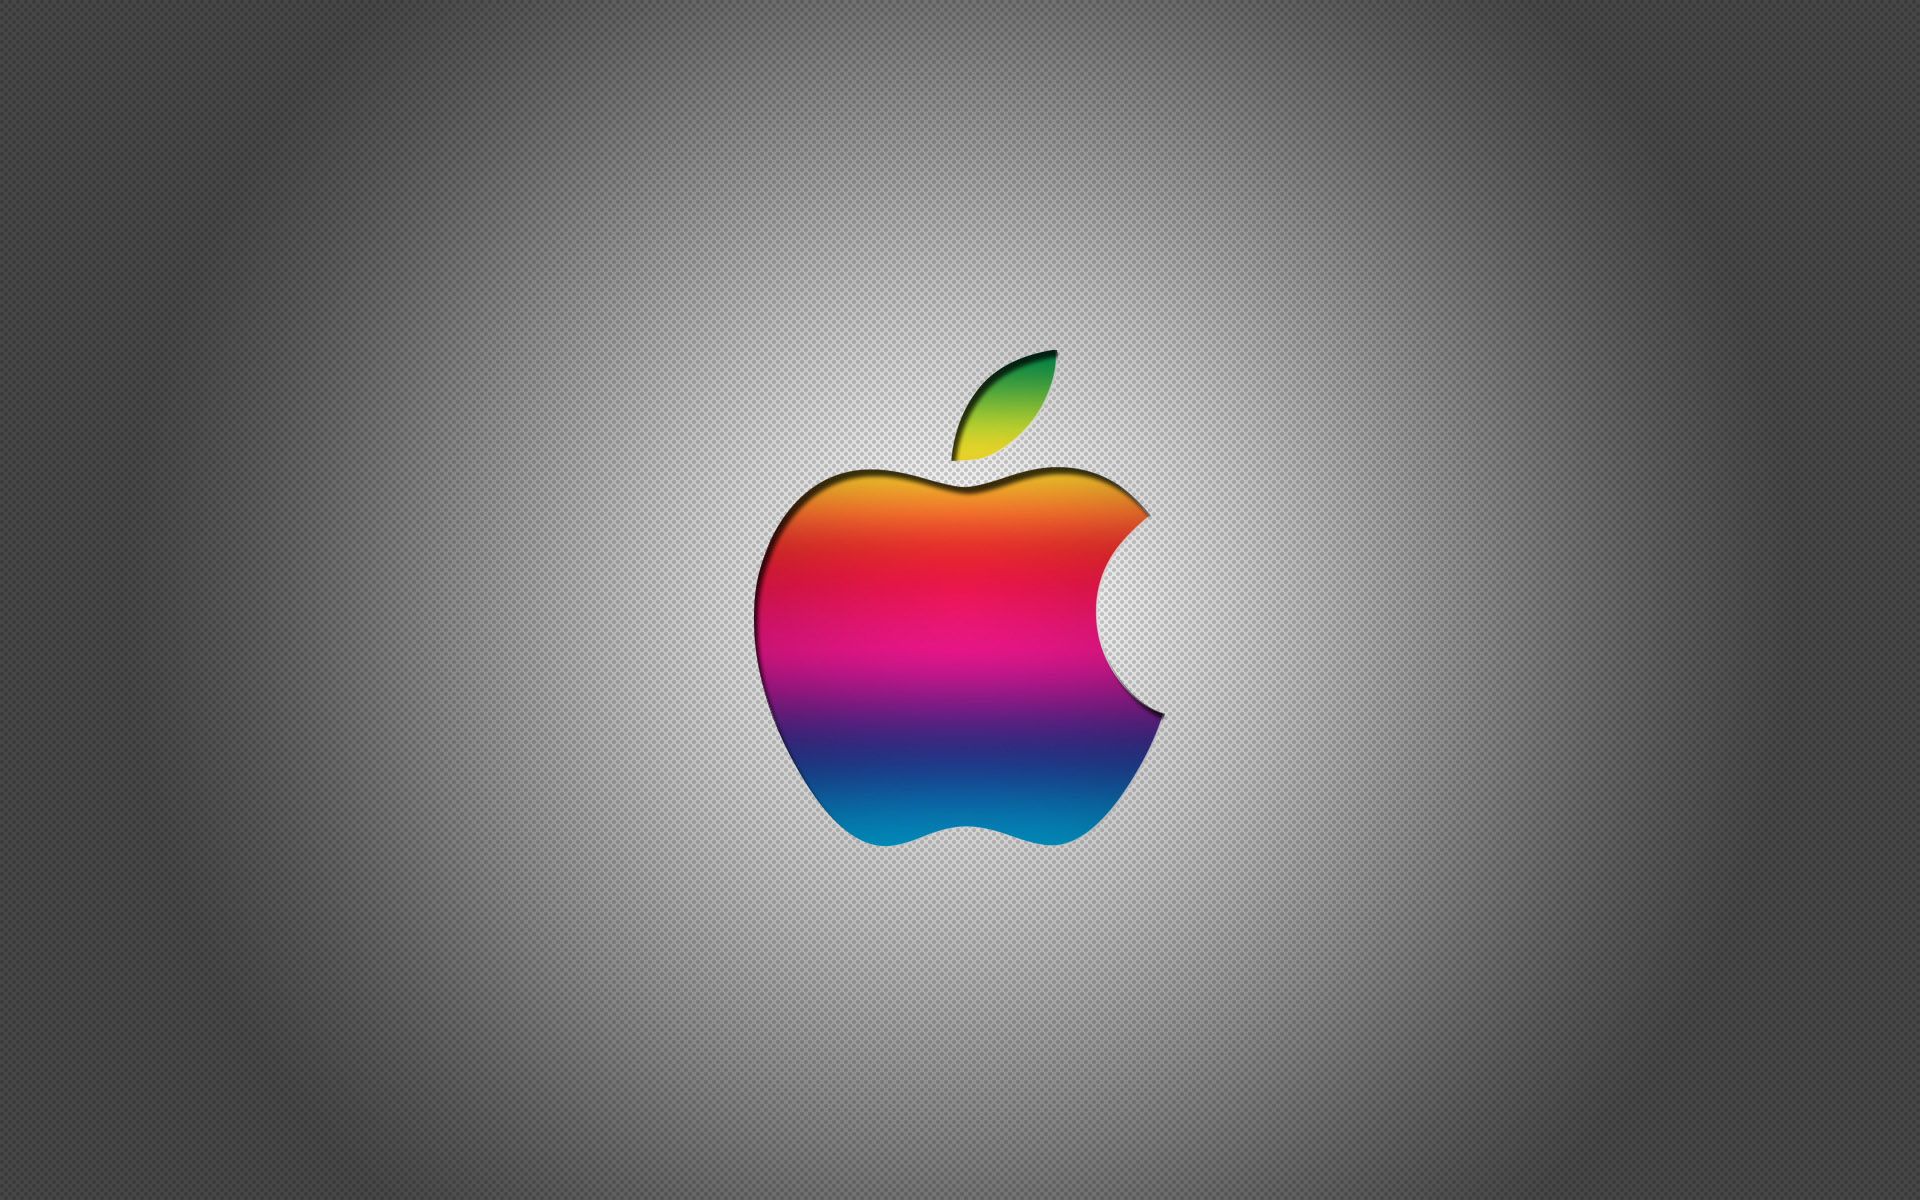 Colorful Apple Logo With Grey Background HD Wallpaper Desktop Mac. Apple background, Apple wallpaper, Apple logo wallpaper